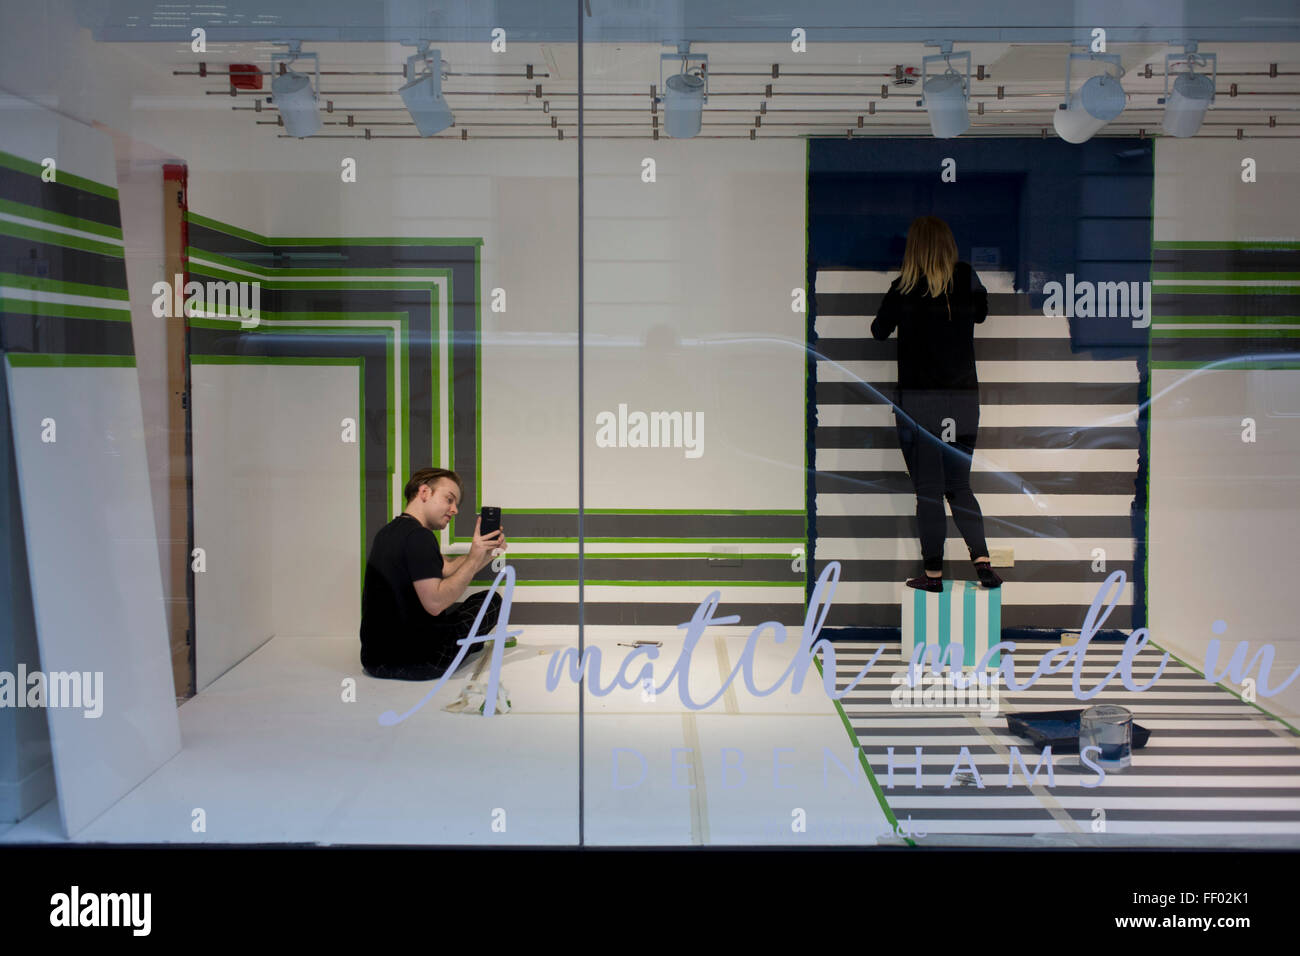 Window dressers prepare a new window design with a tripes theme in the oxford Street branch of retailer Debenhams. Stock Photo